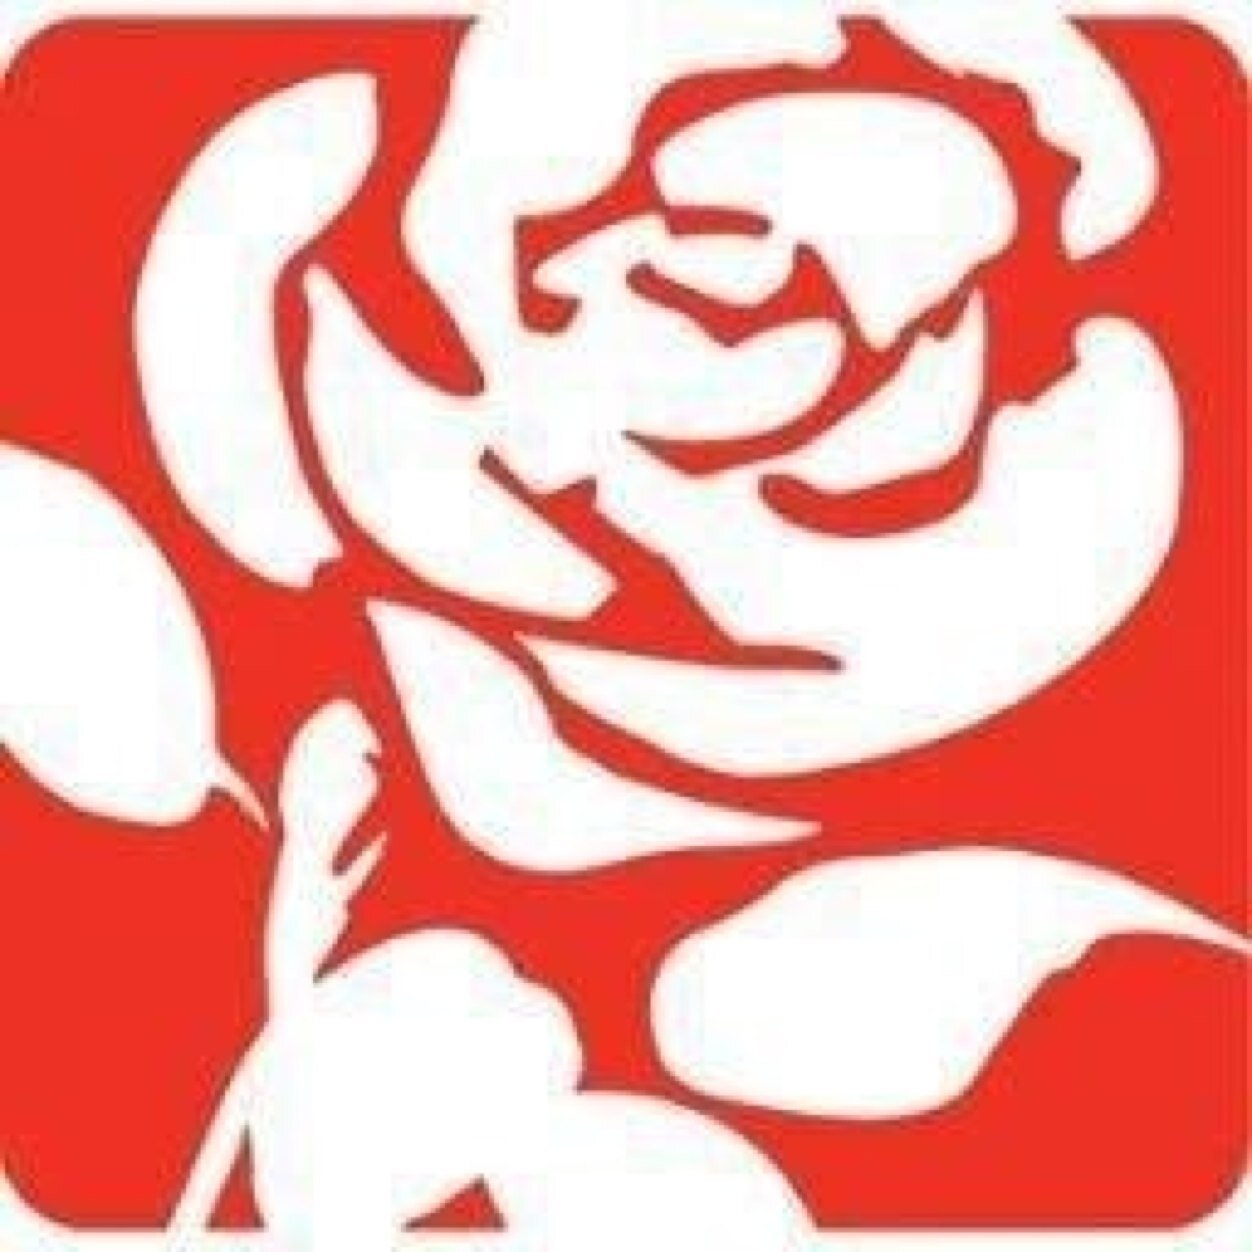 The official Twitter account of Swansea East Labour Party